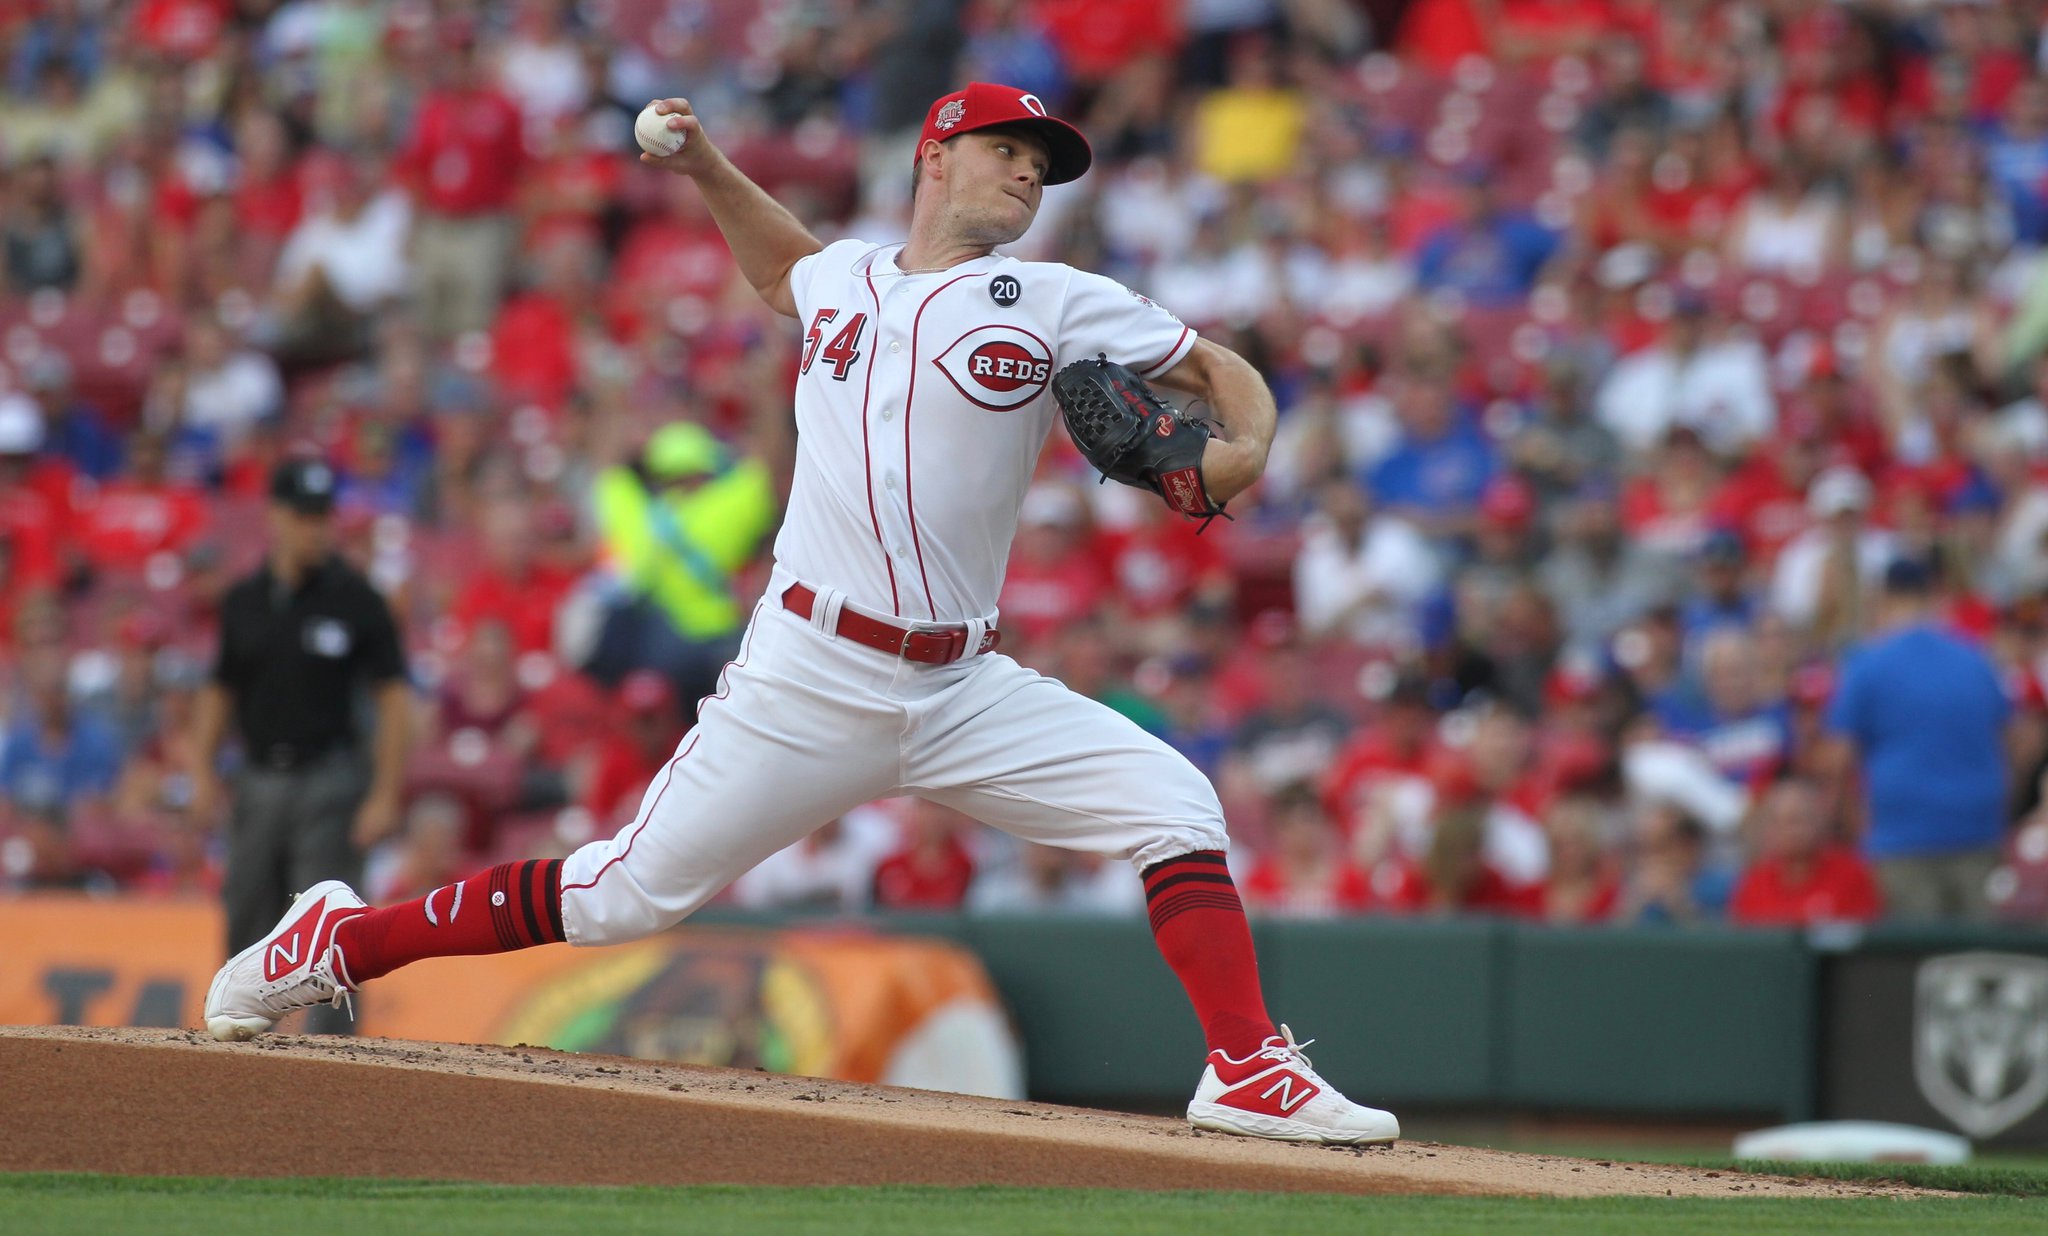 Gray on signing contract extension with Reds: 'It just feels right